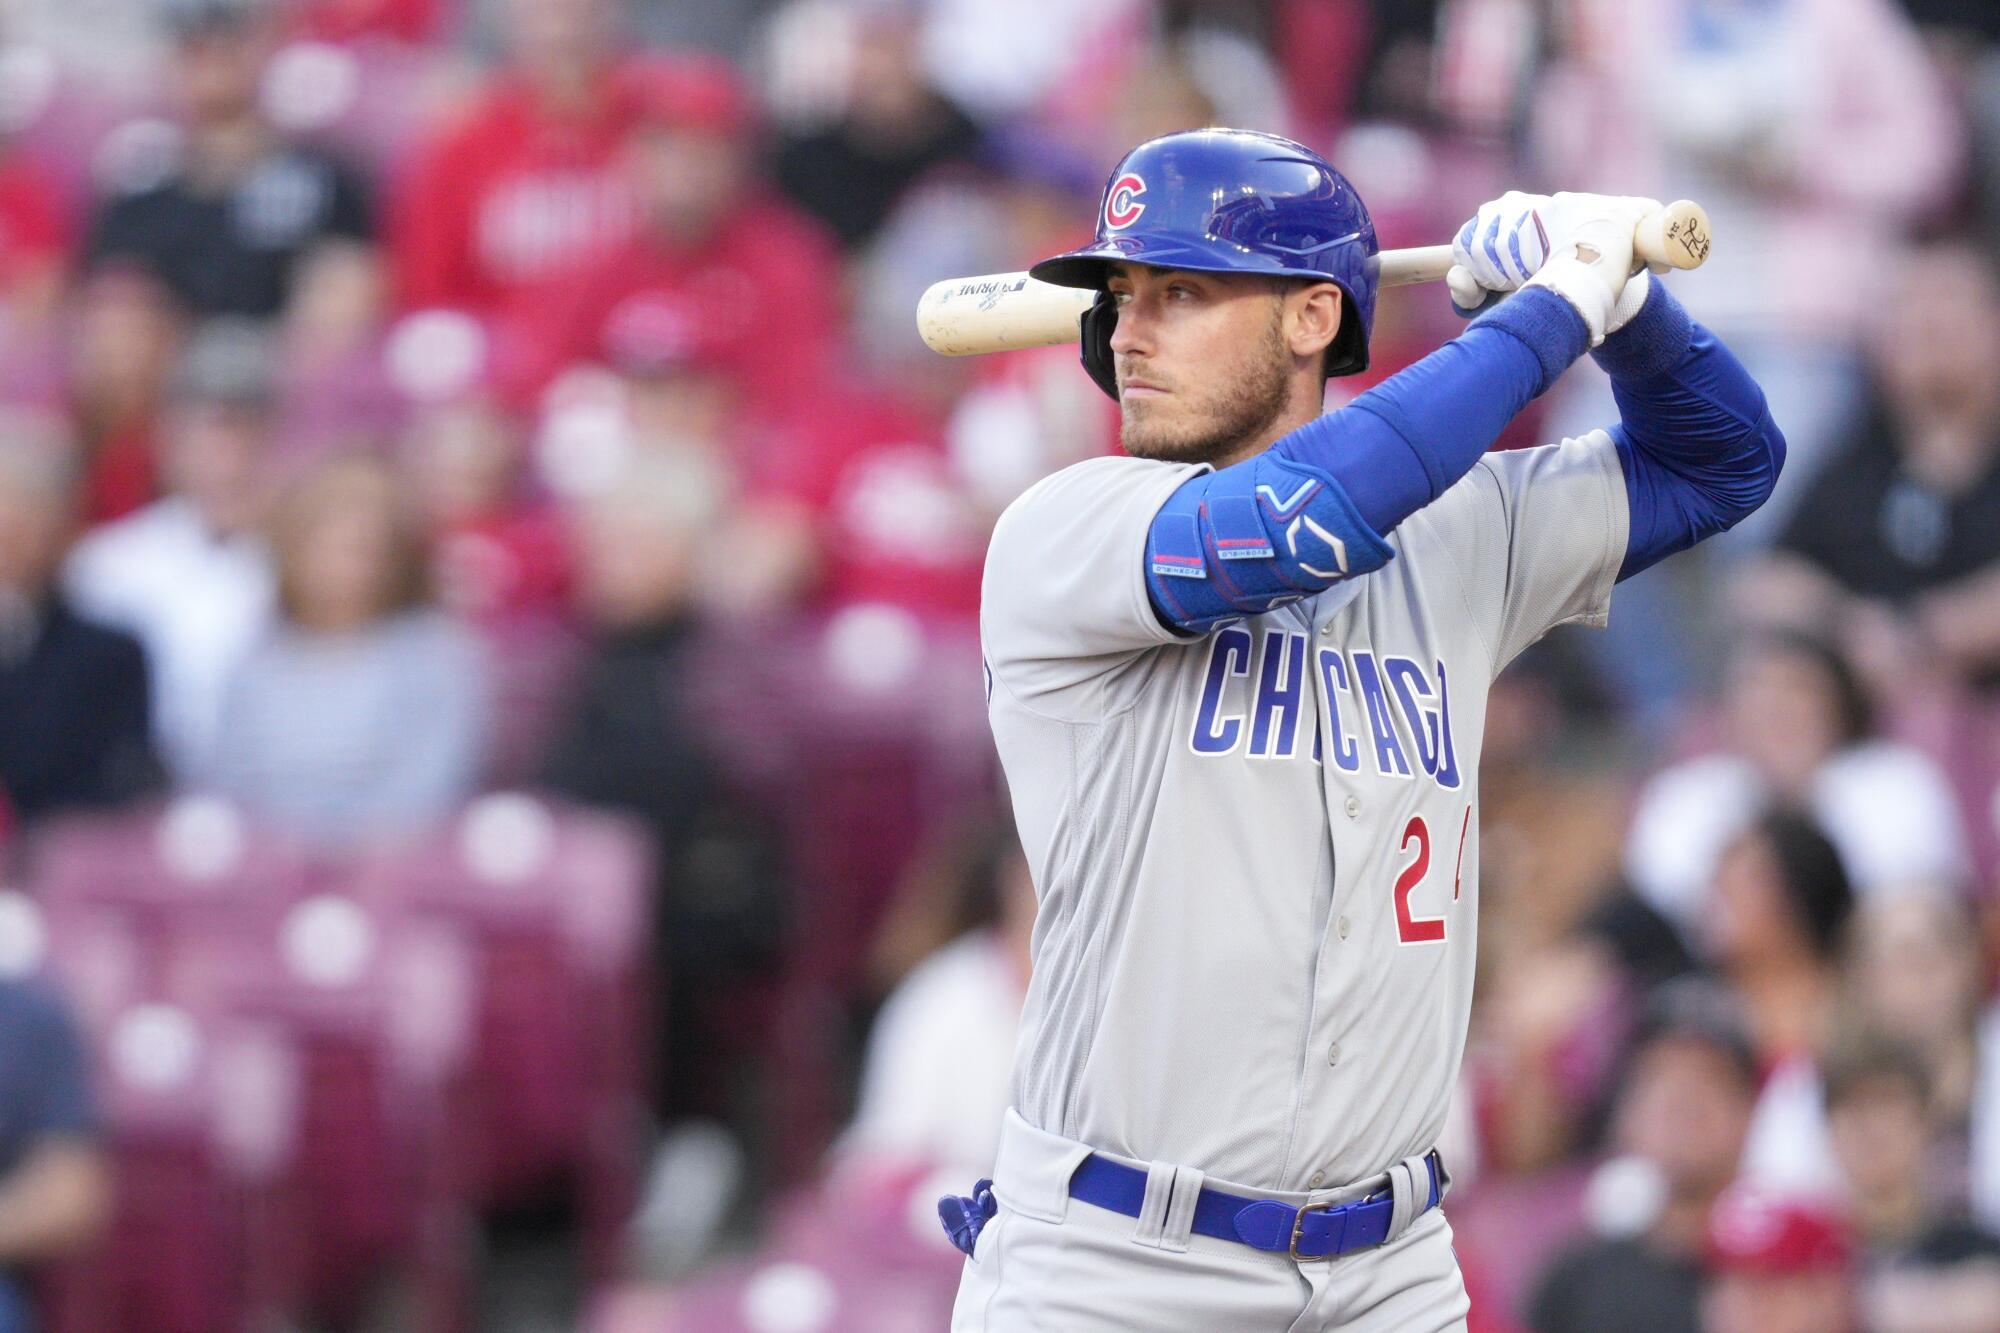 Cody Bellinger bats for the Chicago Cubs in a game against the Cincinnati Reds on April 3, 2023.